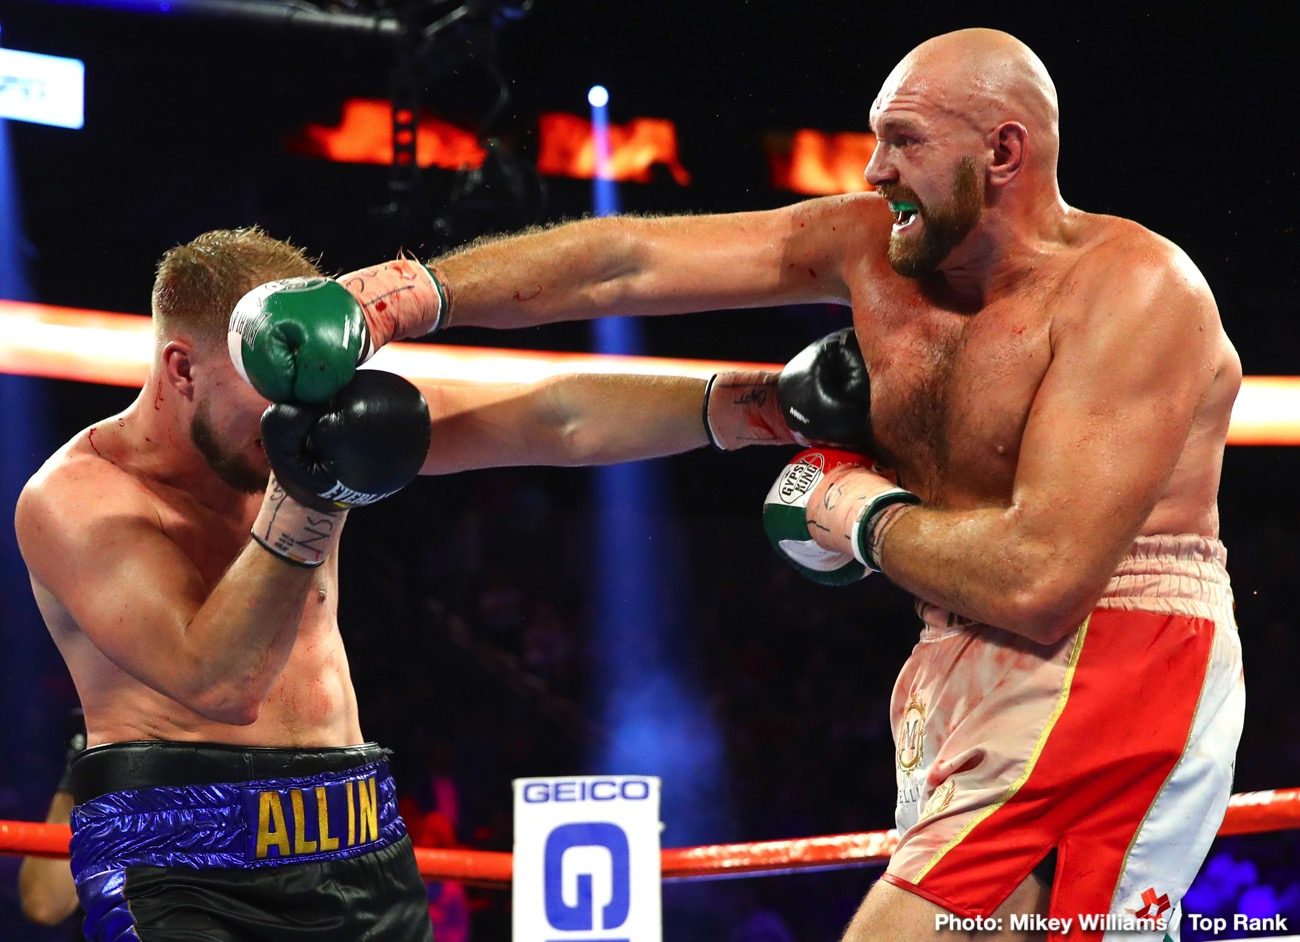 Image: Fury will use more POWER on his punches for Wilder rematch - Andy Lee